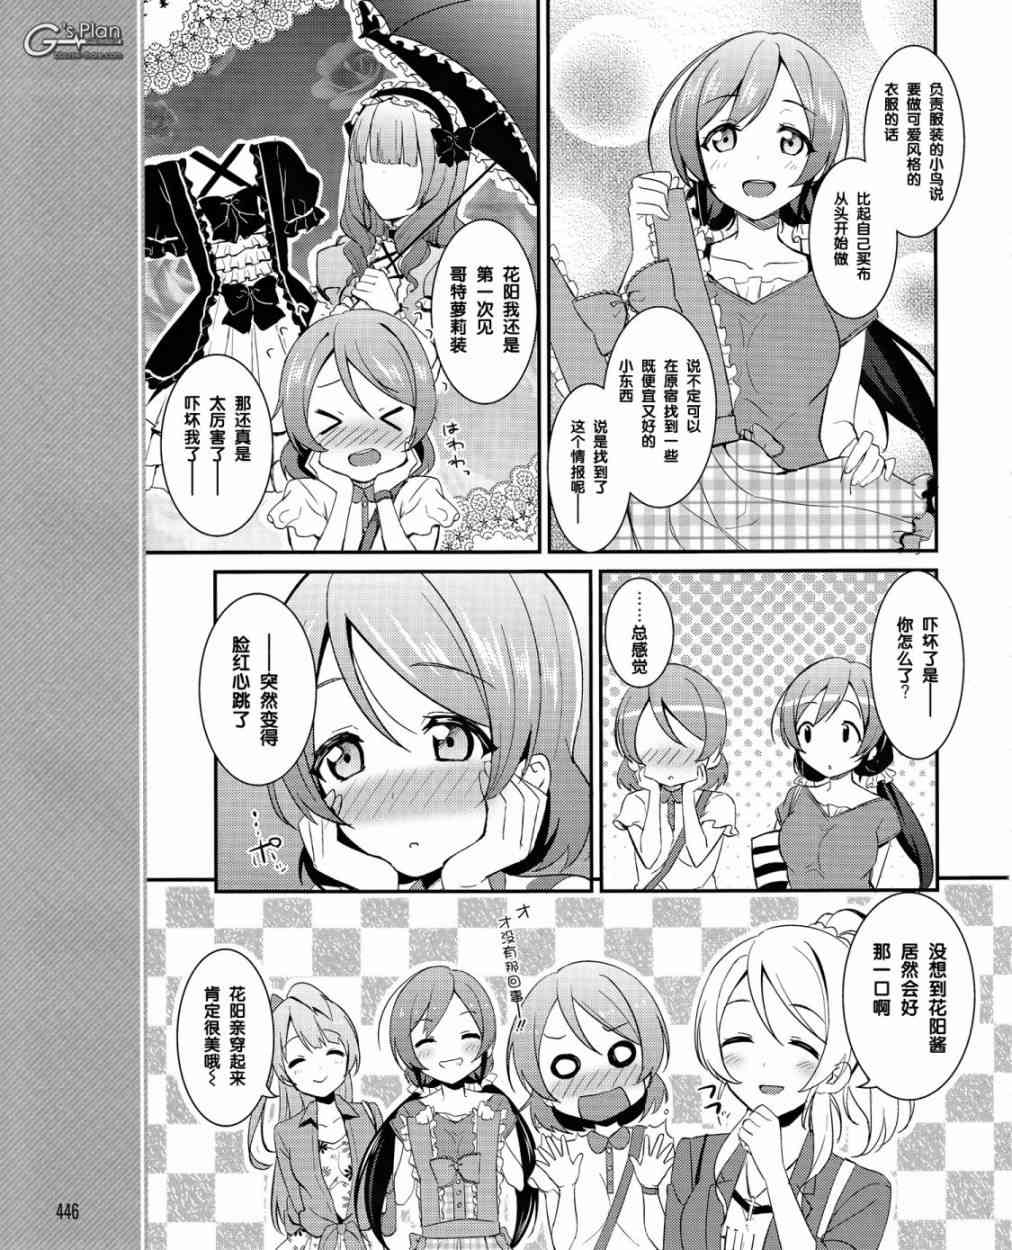 LoveLive - 20話 - 4